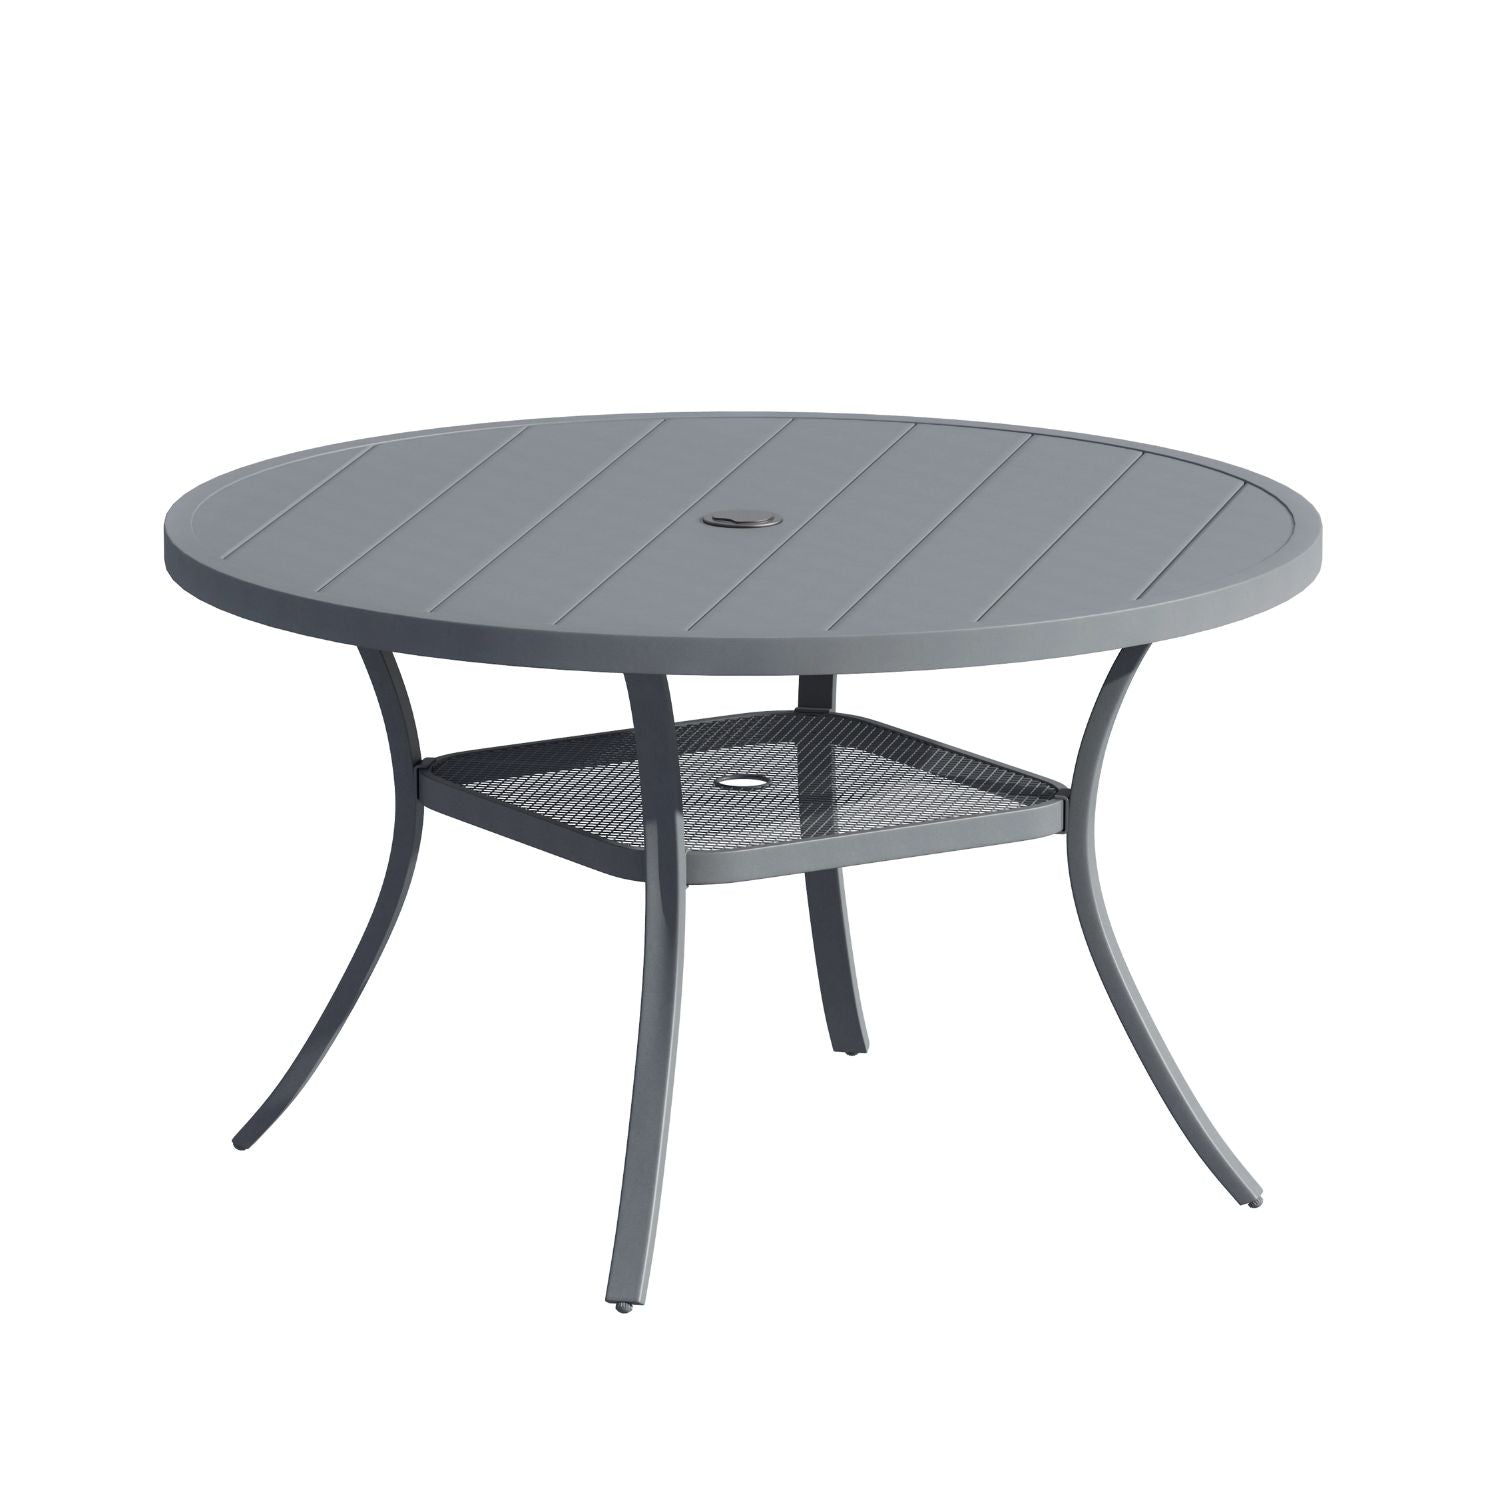 Vicllax 48" Outdoor Round Metal Dining Table with Umbrella Hole and Shelf